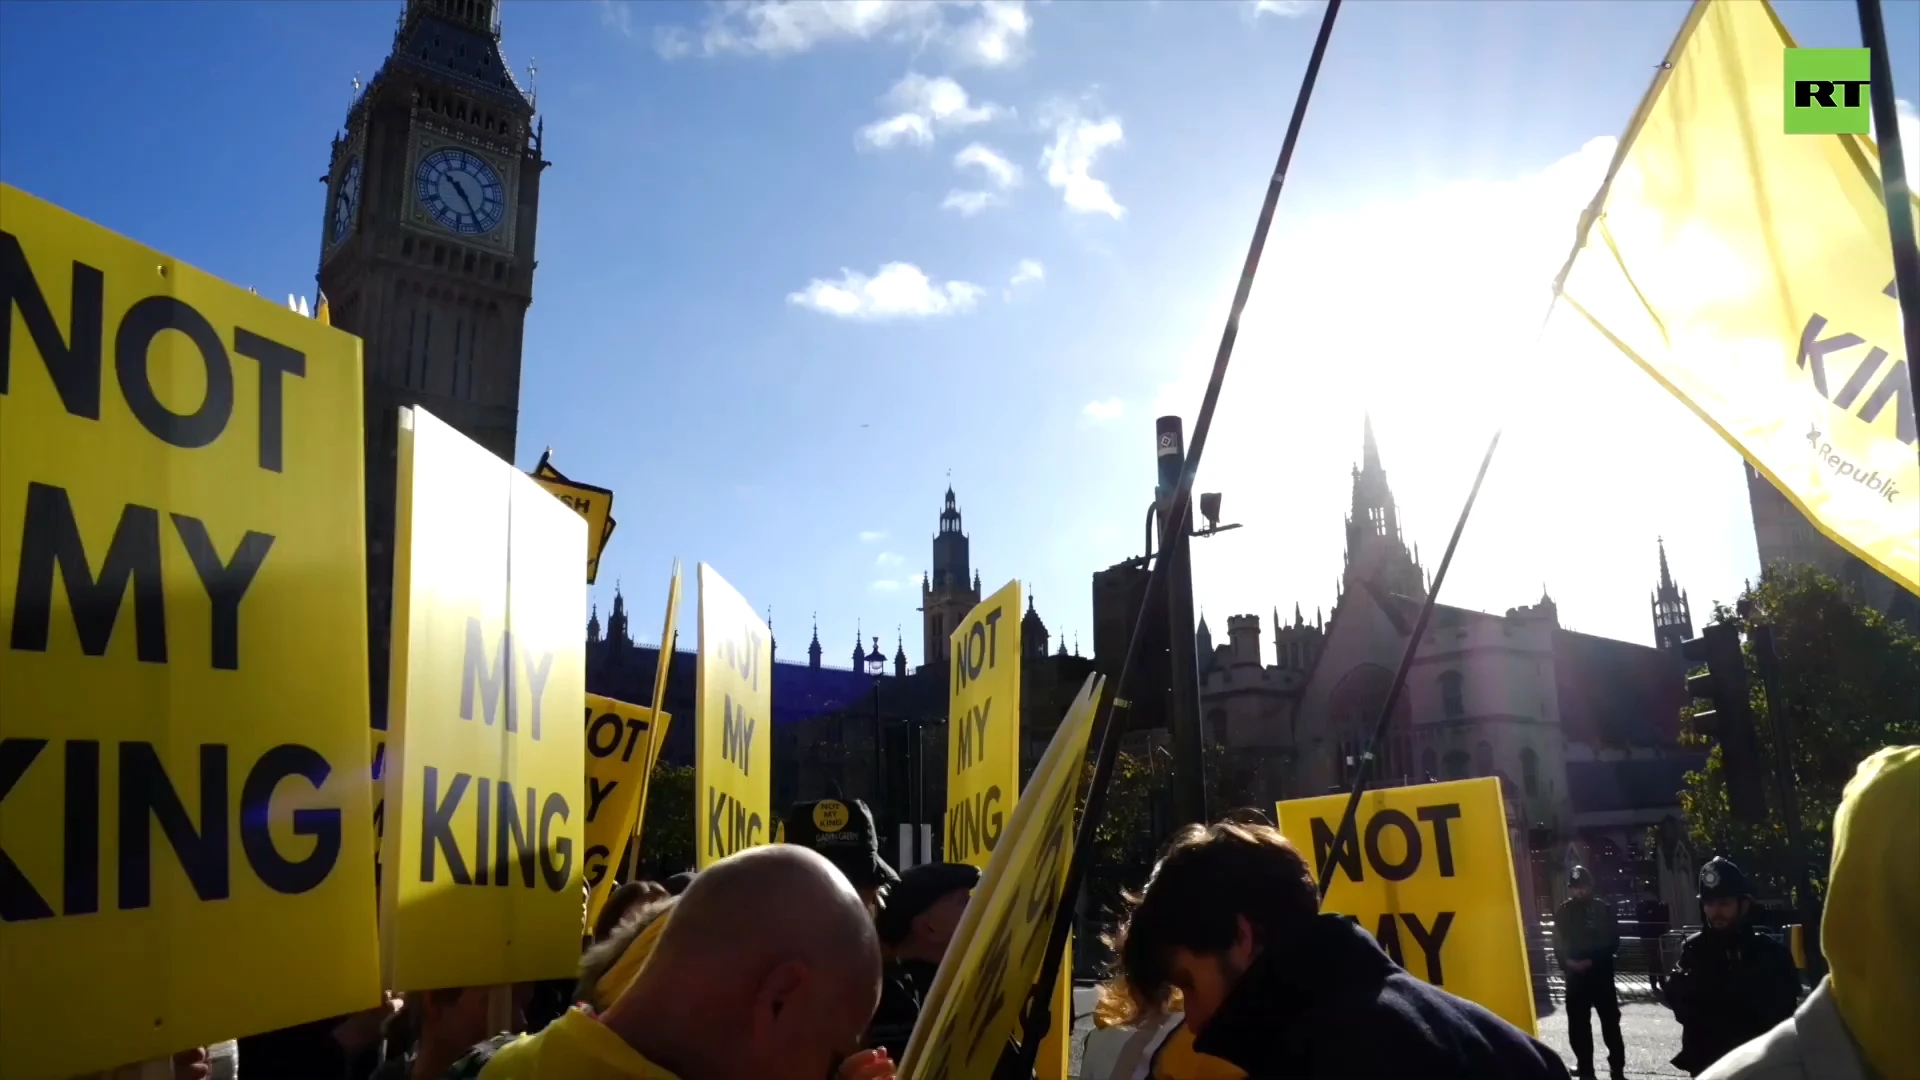 ‘Not my king’ | Protesters hold anti-monarchy rally outside Westminster in UK